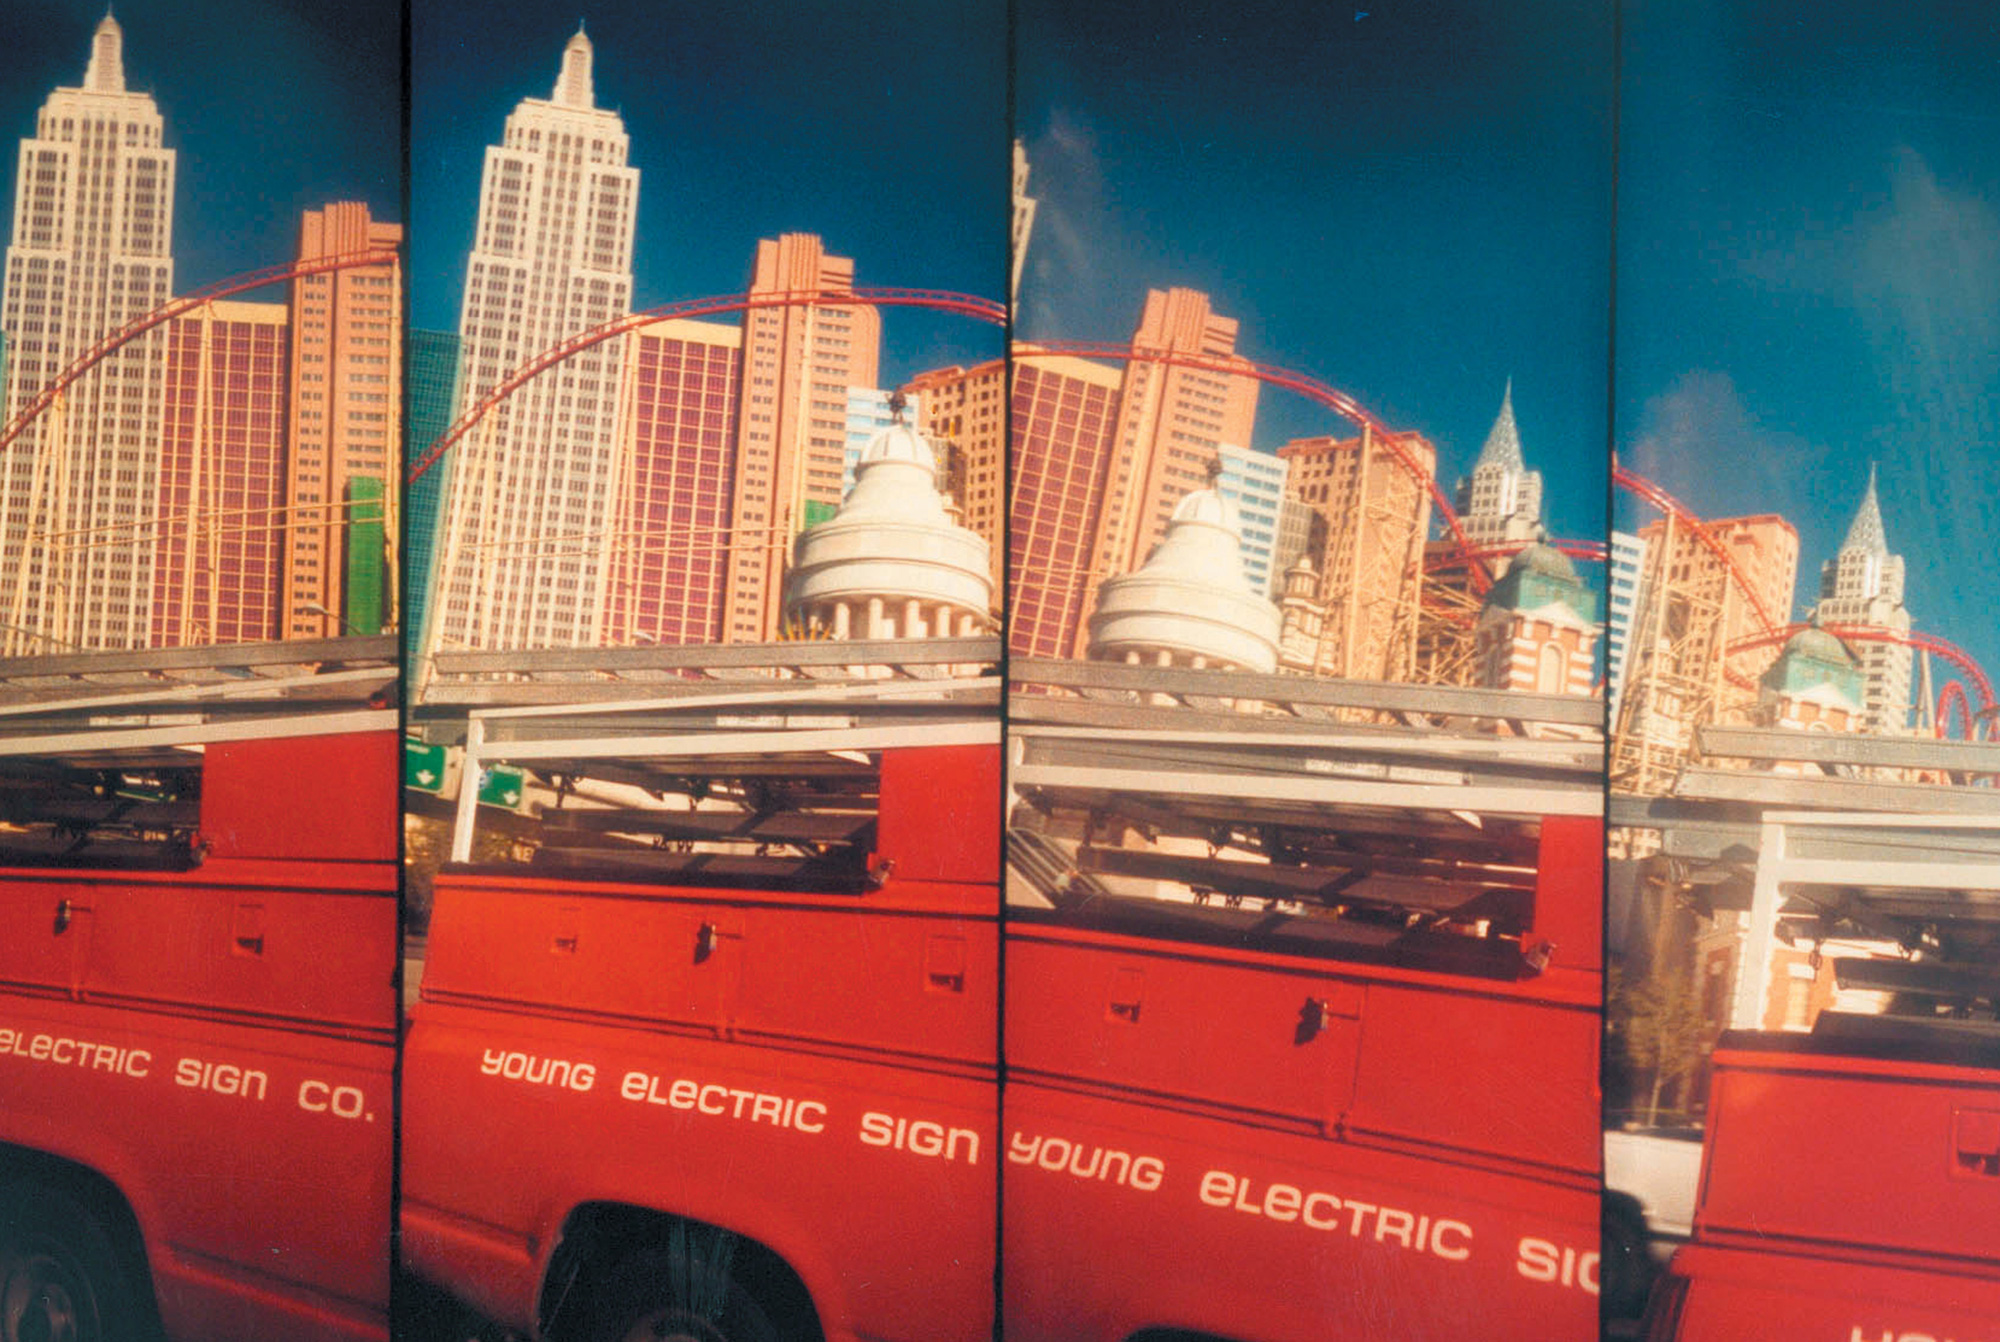 Four Lomographic images depicting a red truck in front of tall buildings in a city.